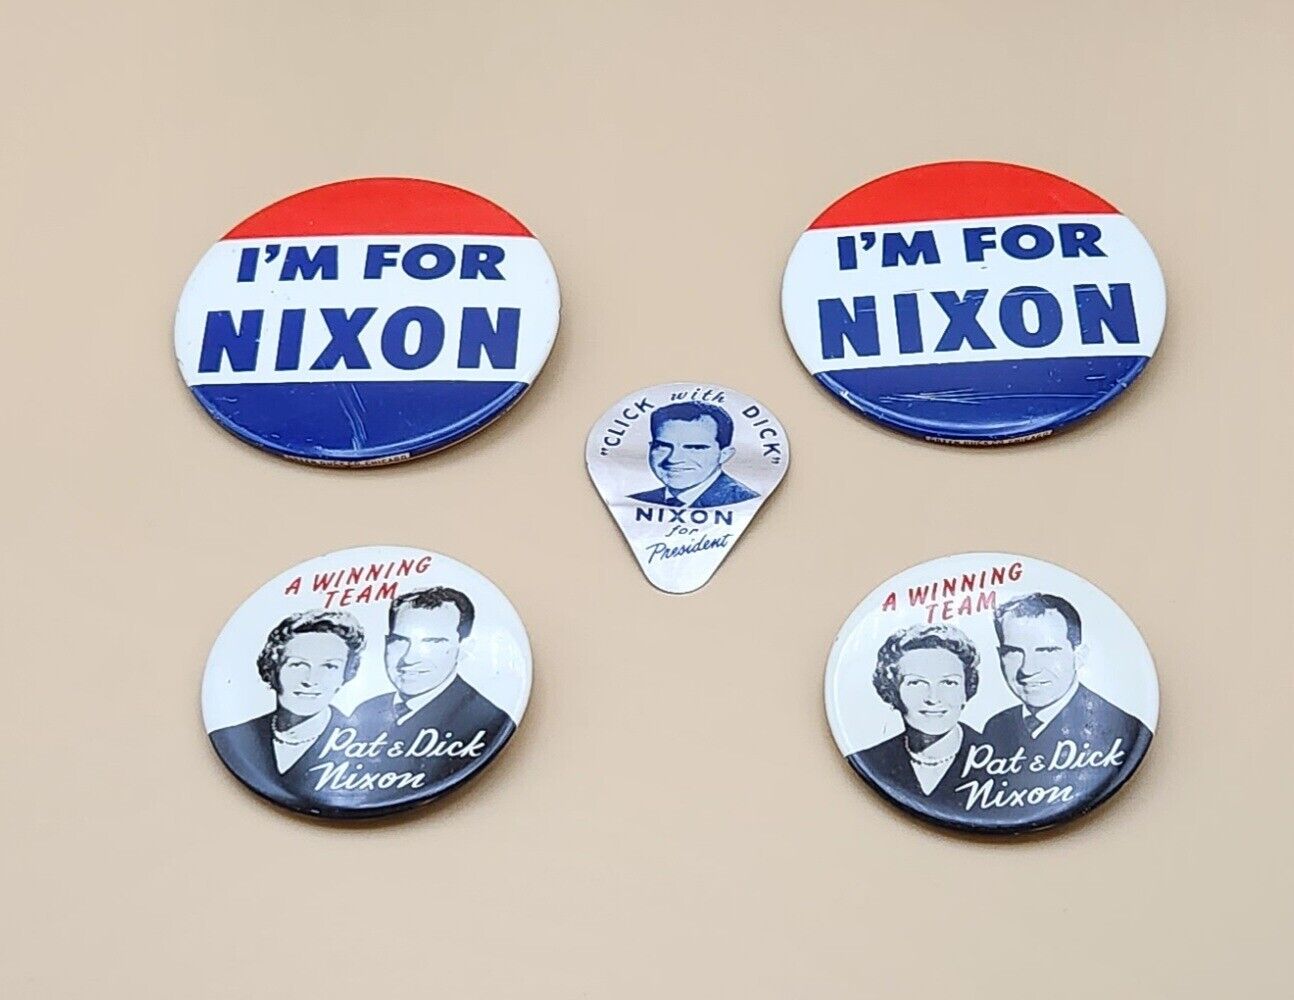 5 VTG items: I\'m for Nixon (2) & A Winning Team (2) Buttons, 1 Click with Dick